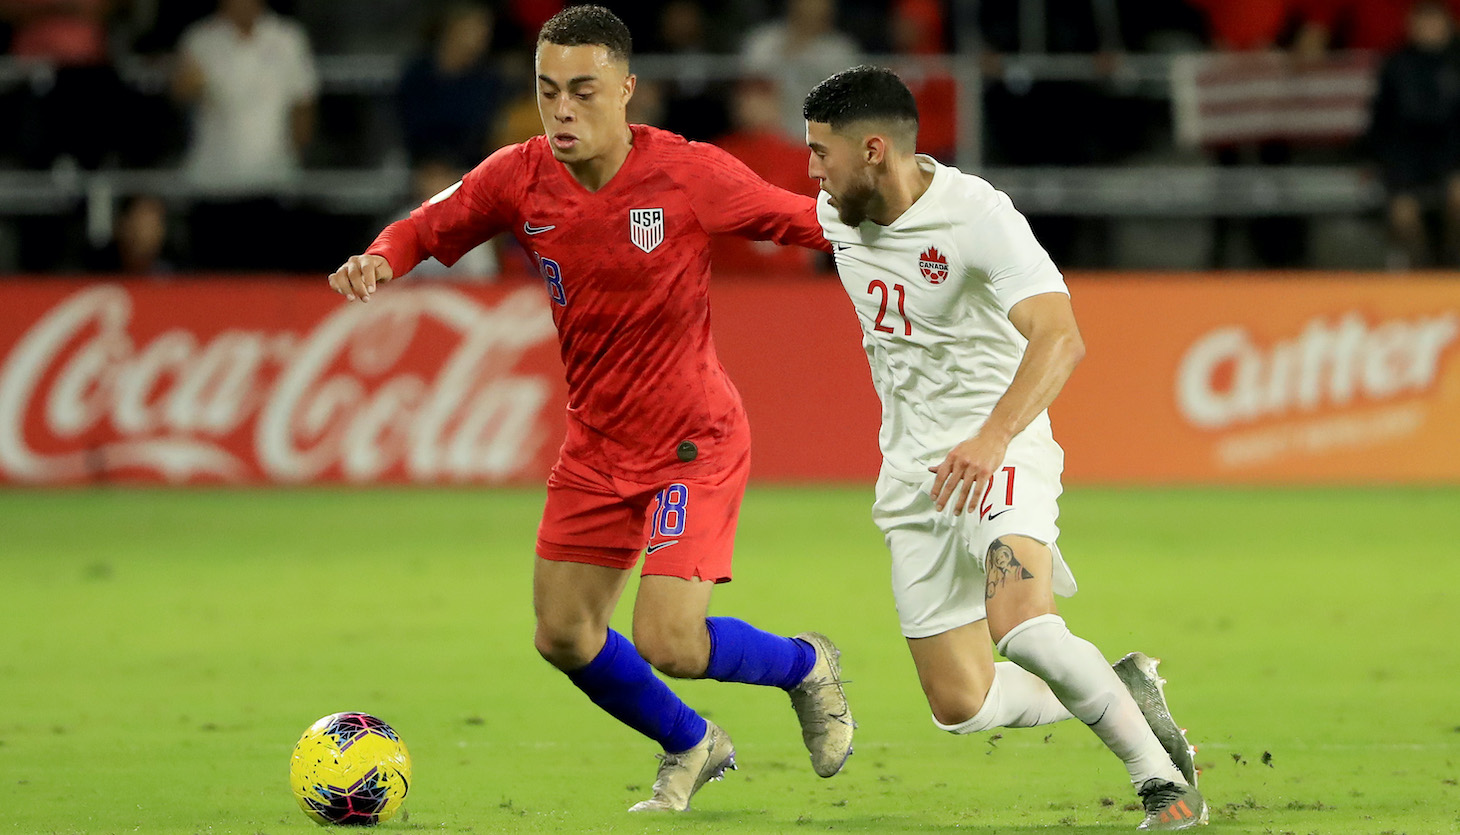 Sergino Dest #18 of the United States drives against Jonathan Osorio #21 of Canada during the CONCACAF Nations League match at Exploria Stadium on November 15, 2019 in Orlando, Florida.